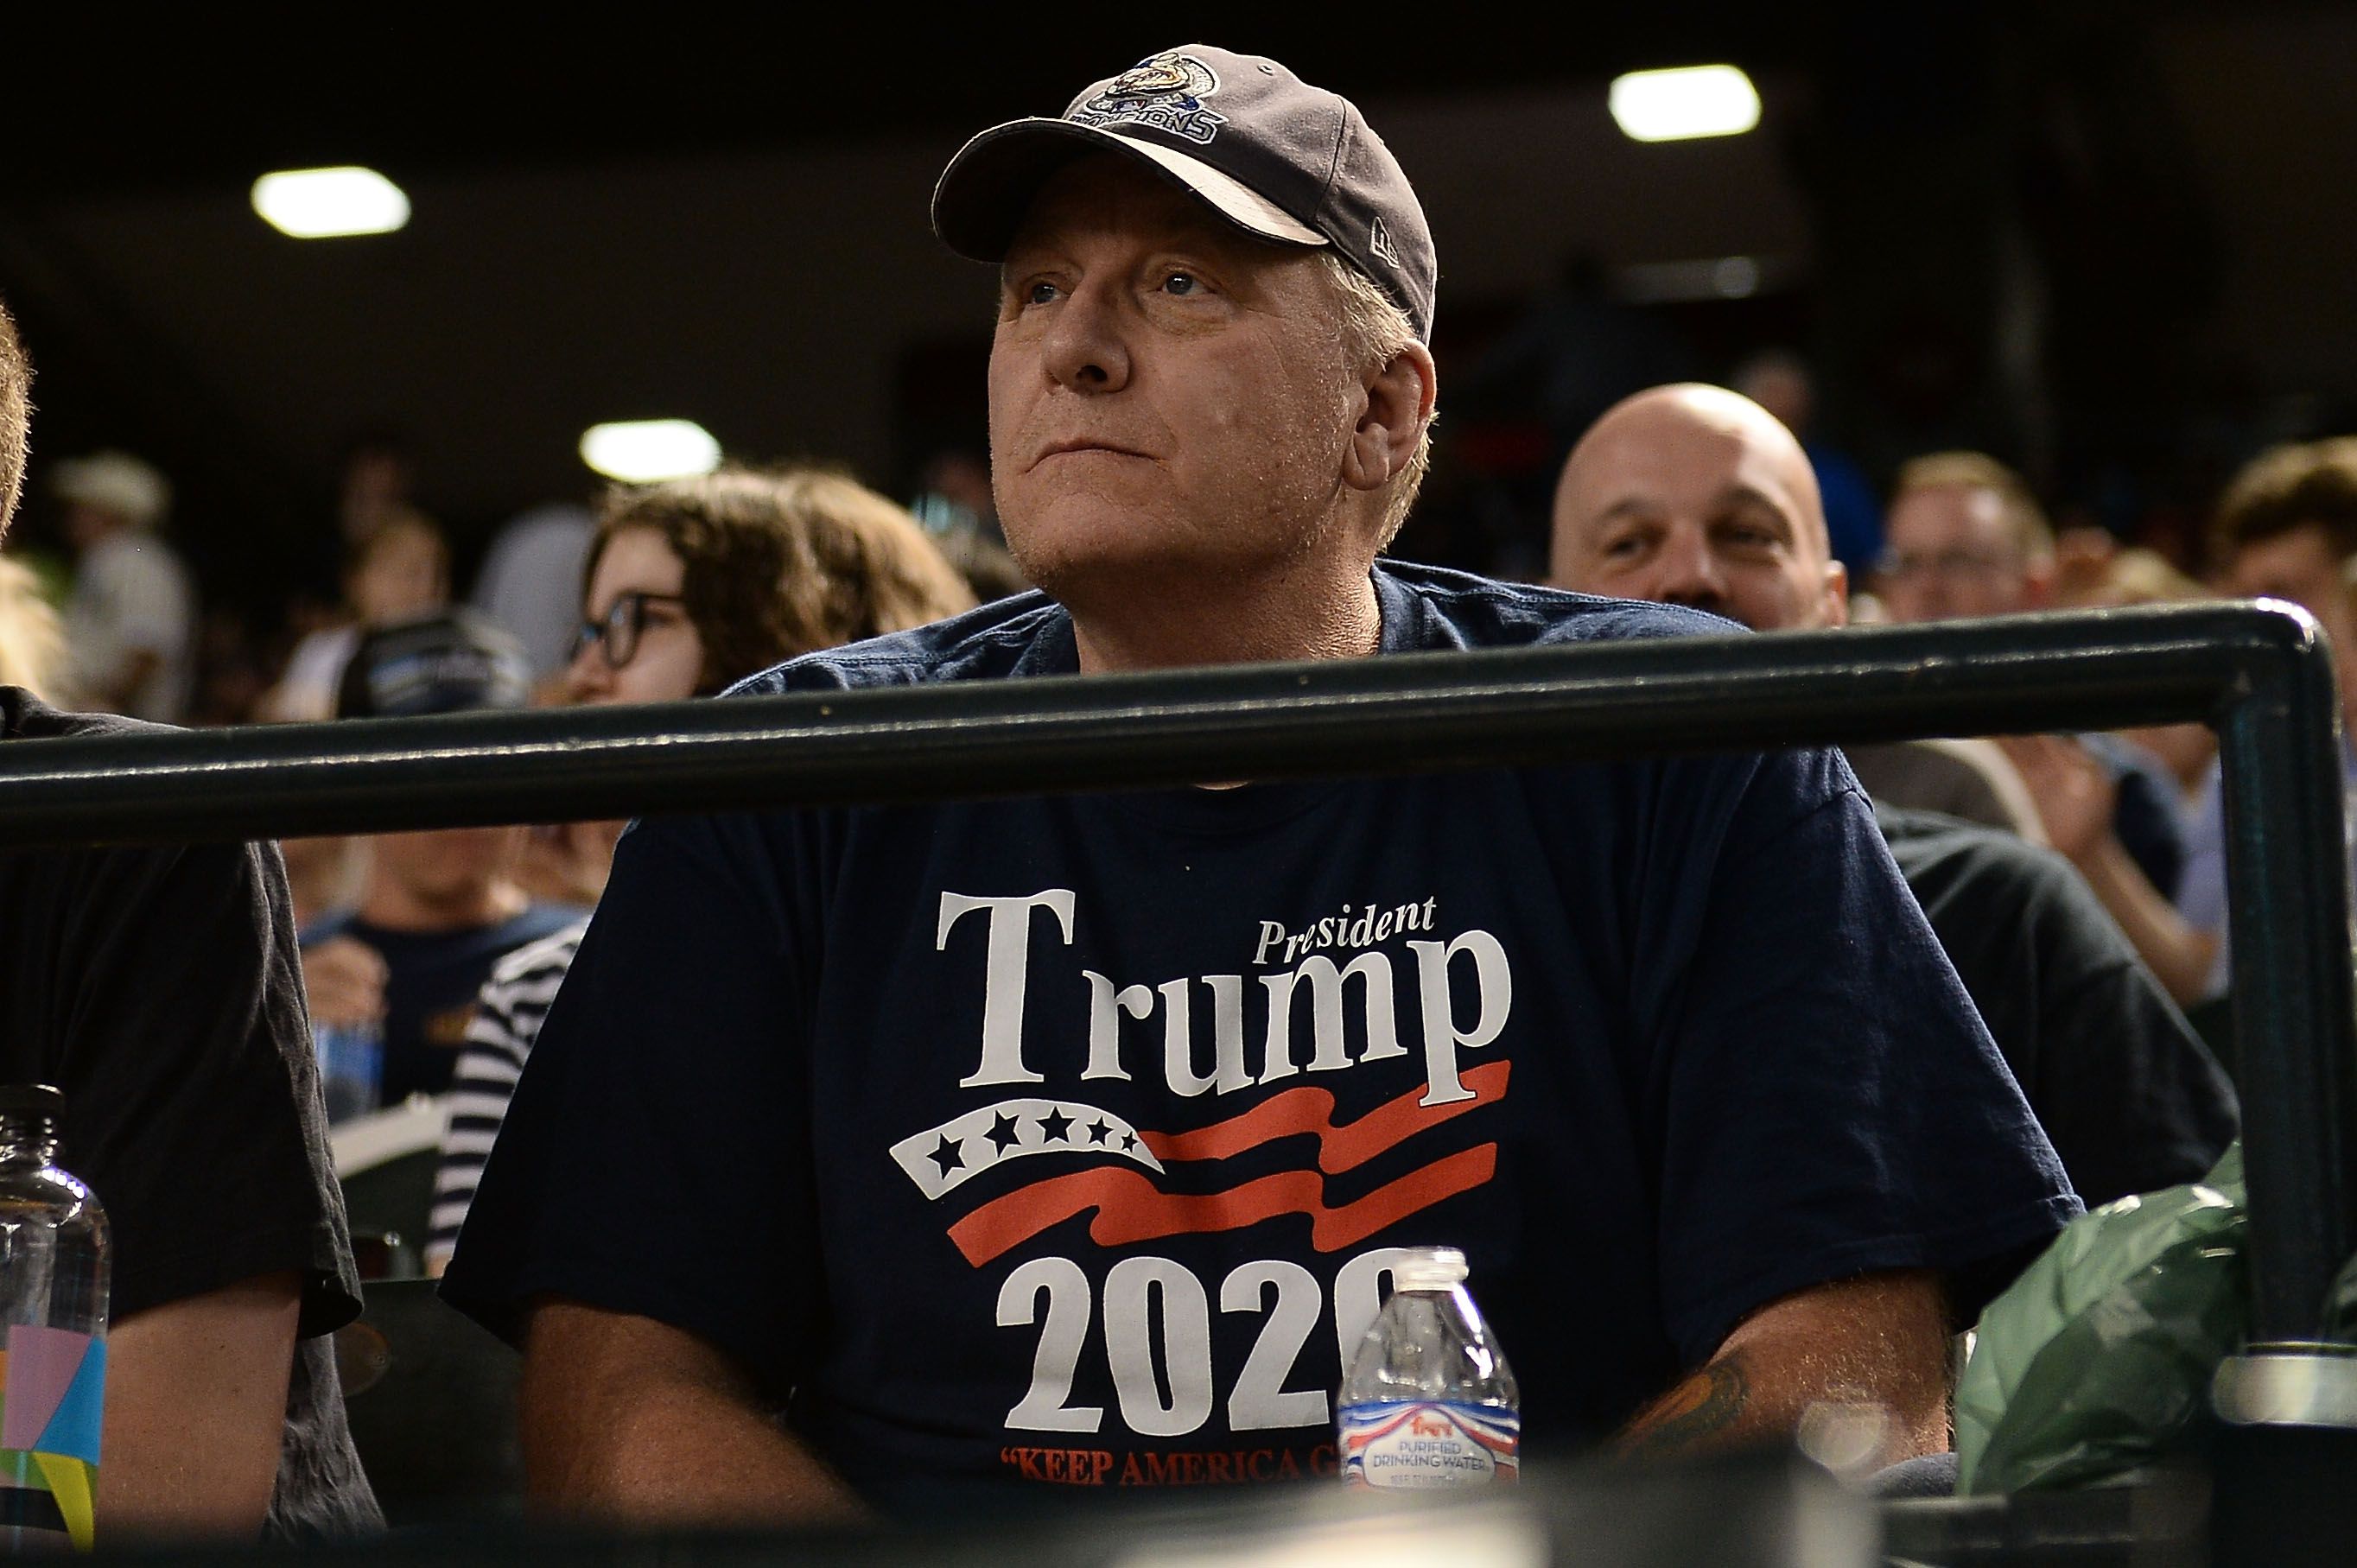 Hall of Fame candidates like Curt Schilling are judged not only as